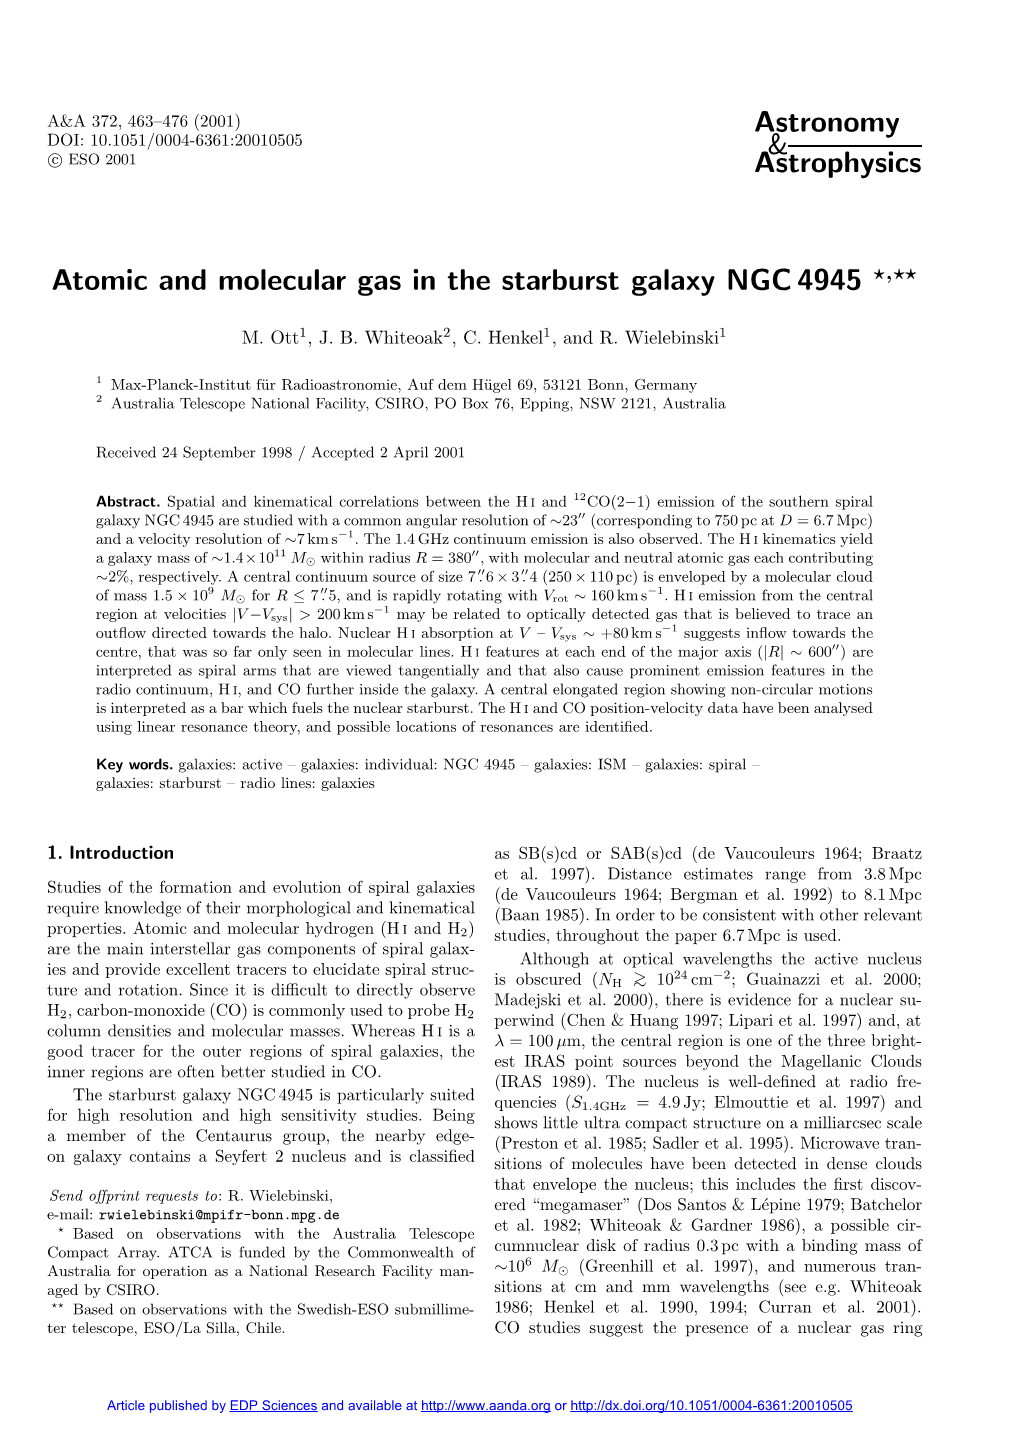 Atomic and Molecular Gas in the Starburst Galaxy NGC 4945 ?,??